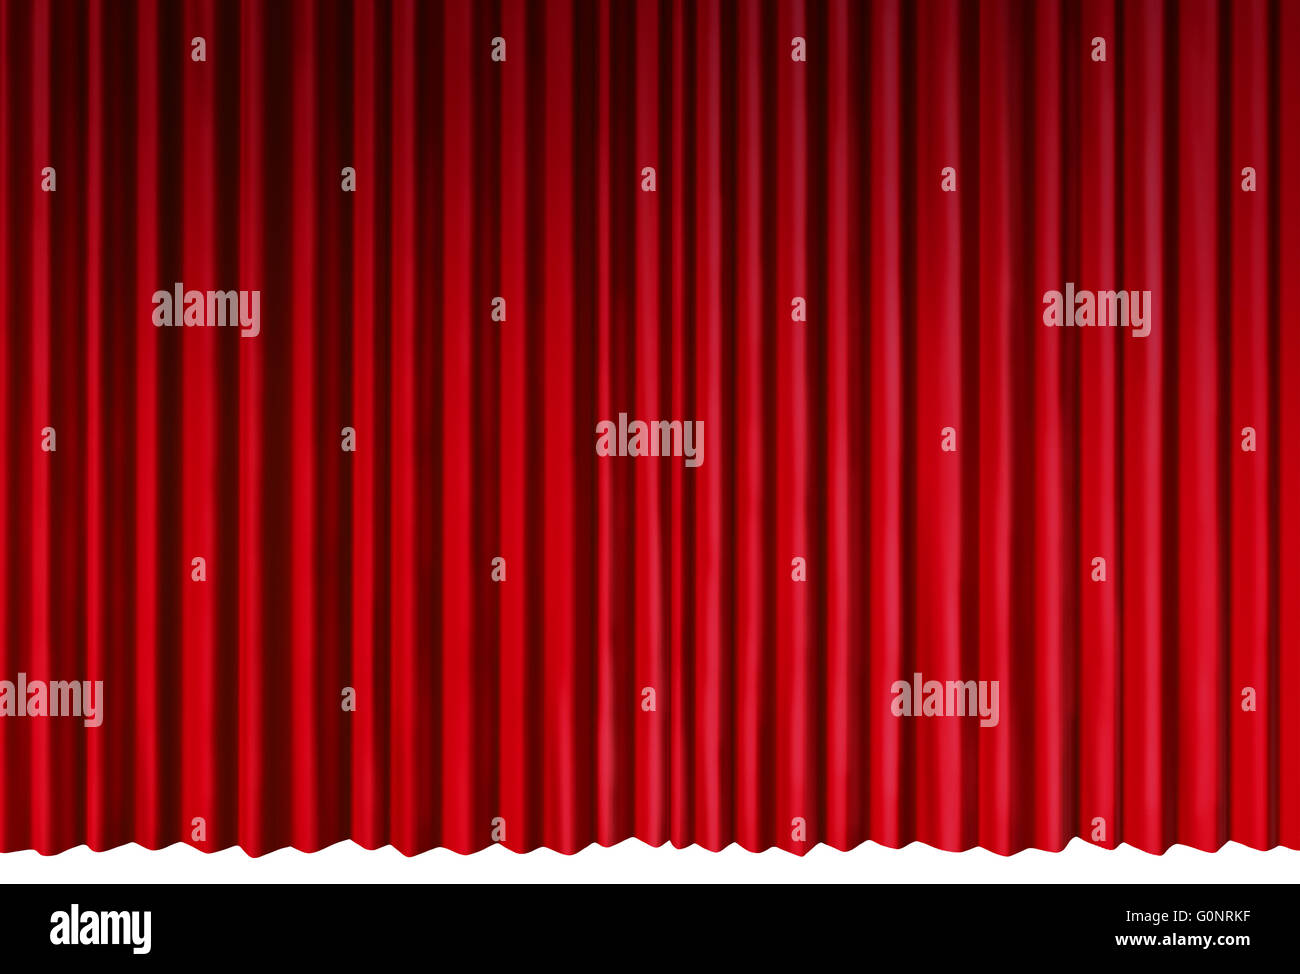 Curtains object as red velvet drapes representing theatrical entertainment stage isolated on a white background as a 3D illustration. Stock Photo